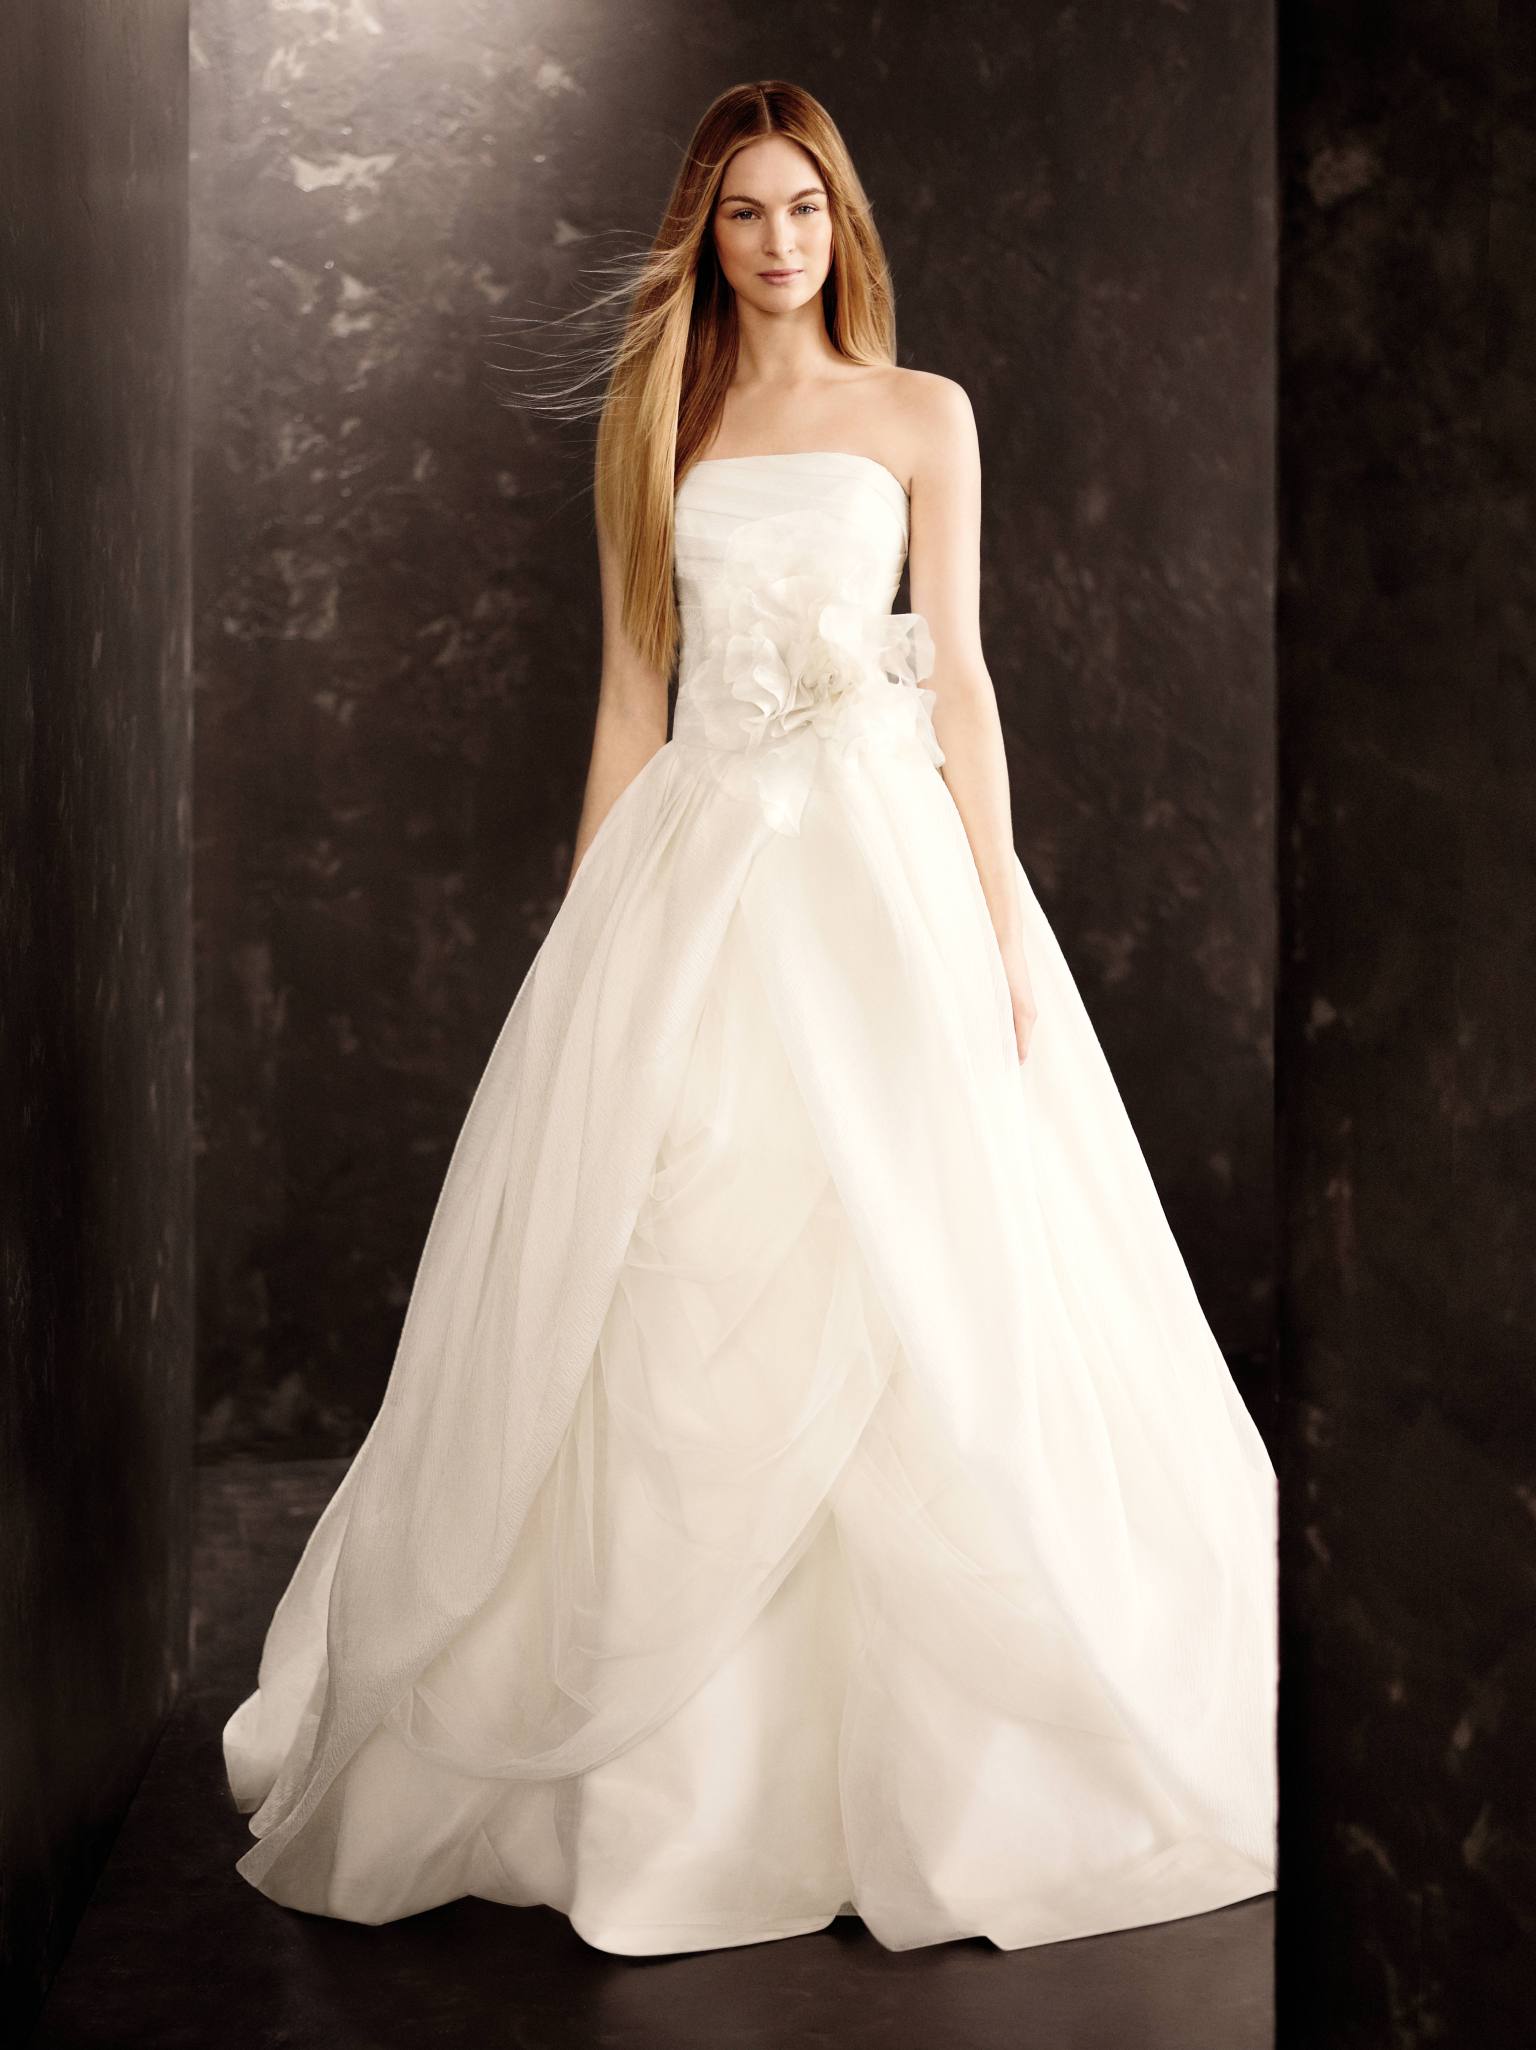 White By Vera Wang Fall 2013 Collection Released At David's Bridal